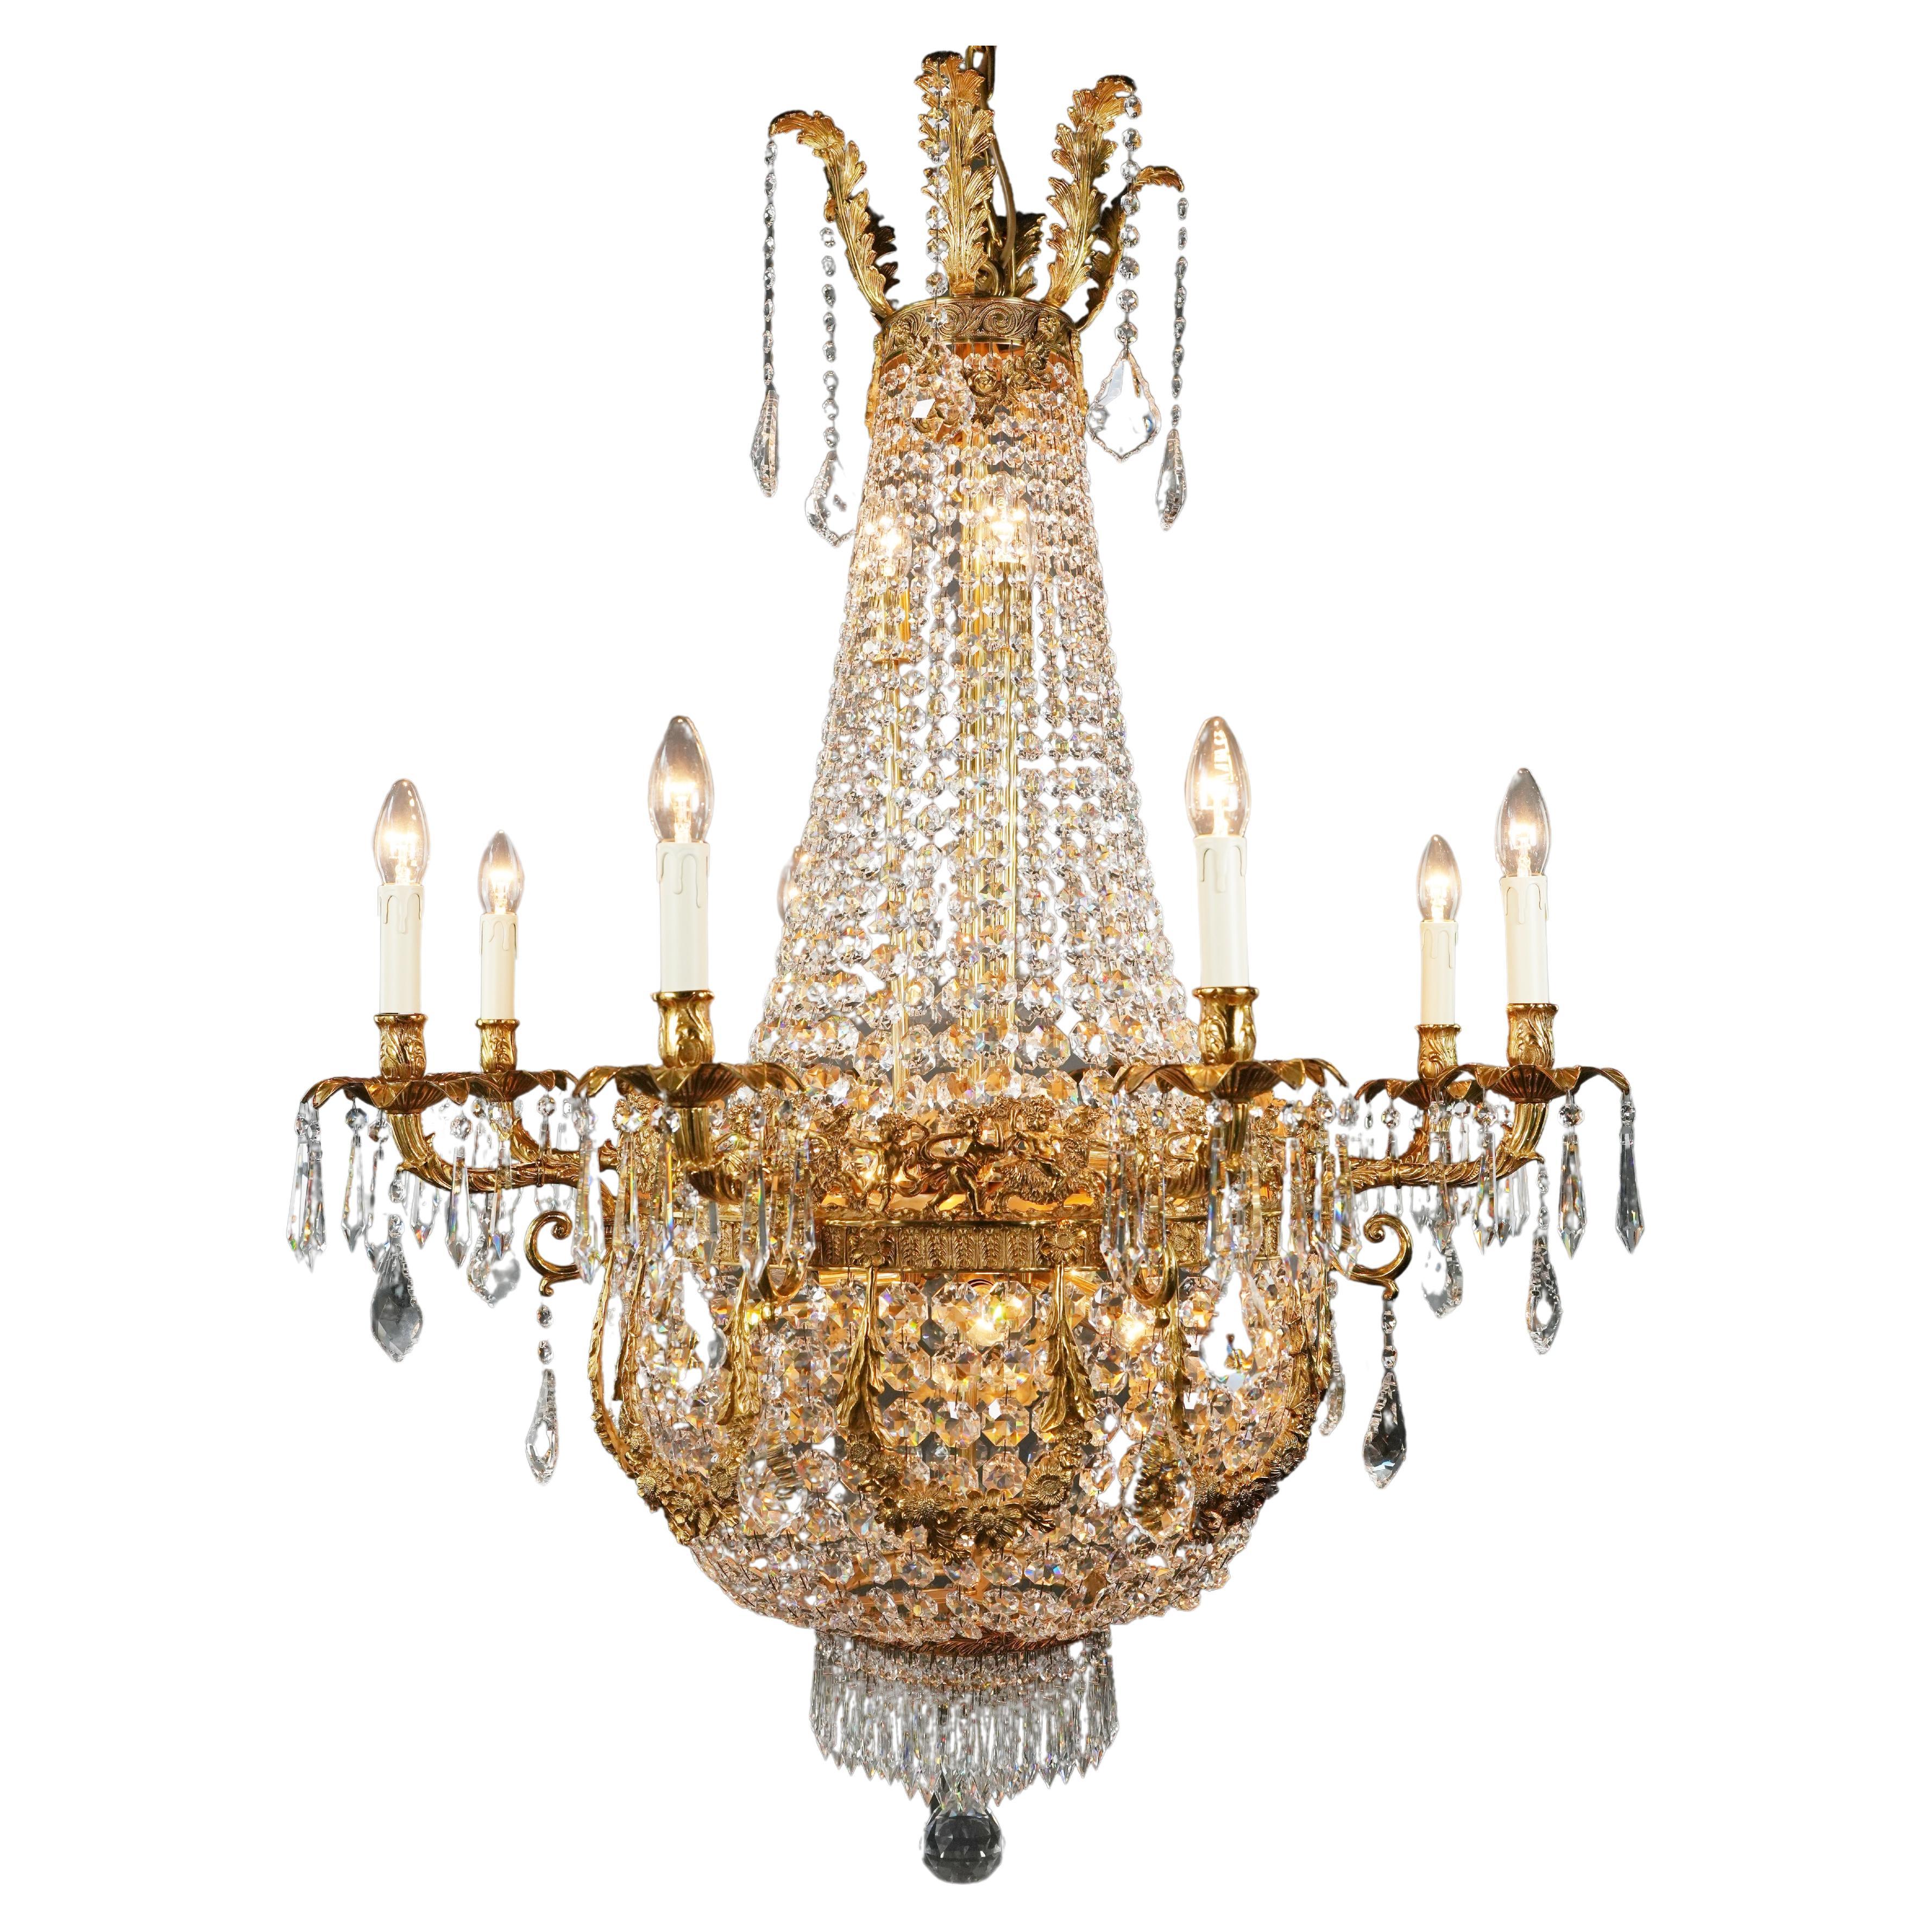 Empire Revival Chandeliers and Pendants